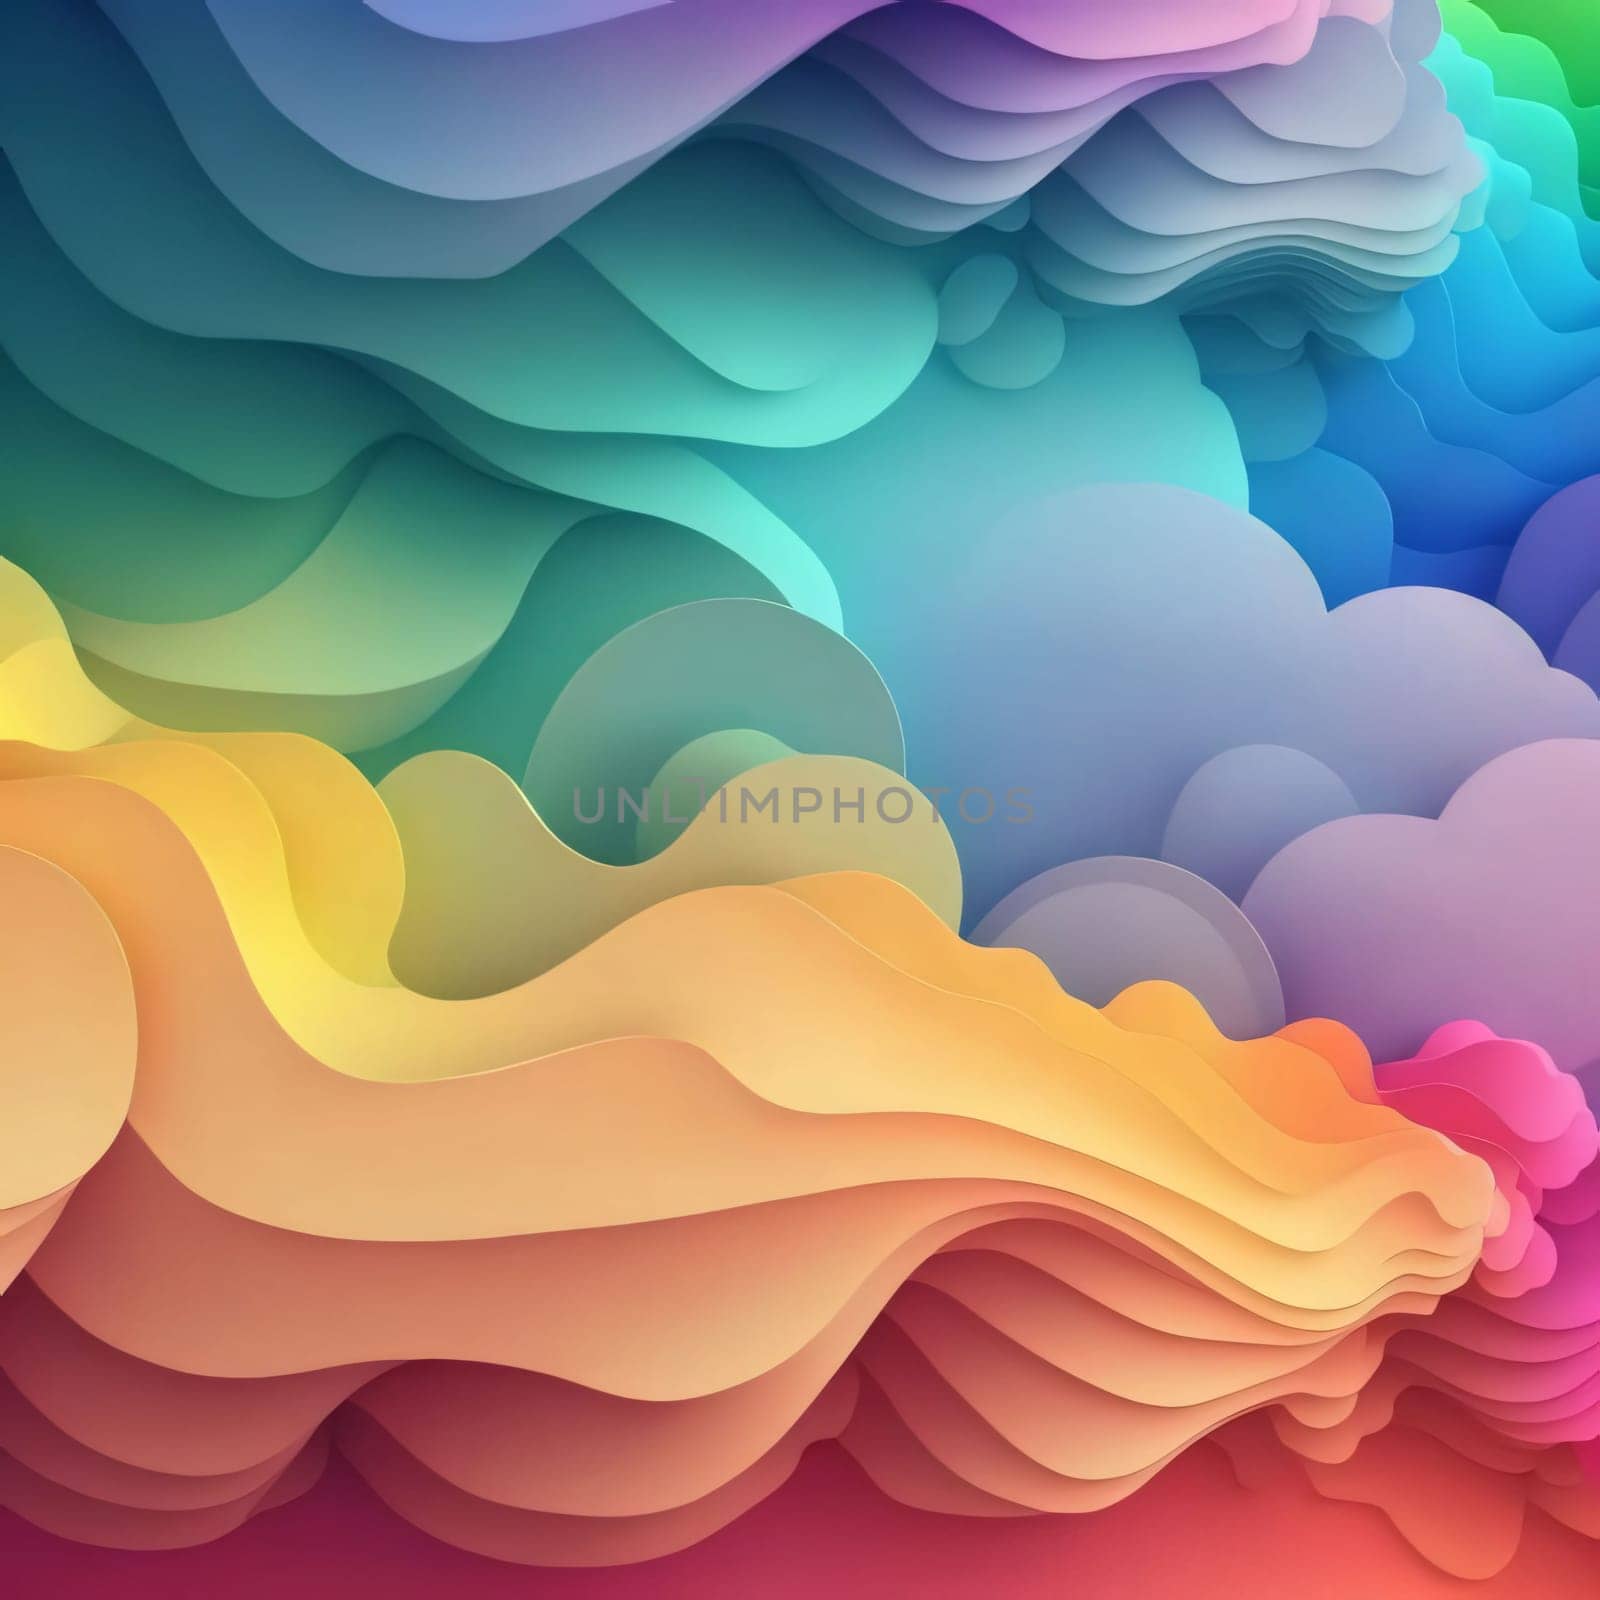 Abstract background design: Rainbow background with paper cut shapes. Vector illustration for your design